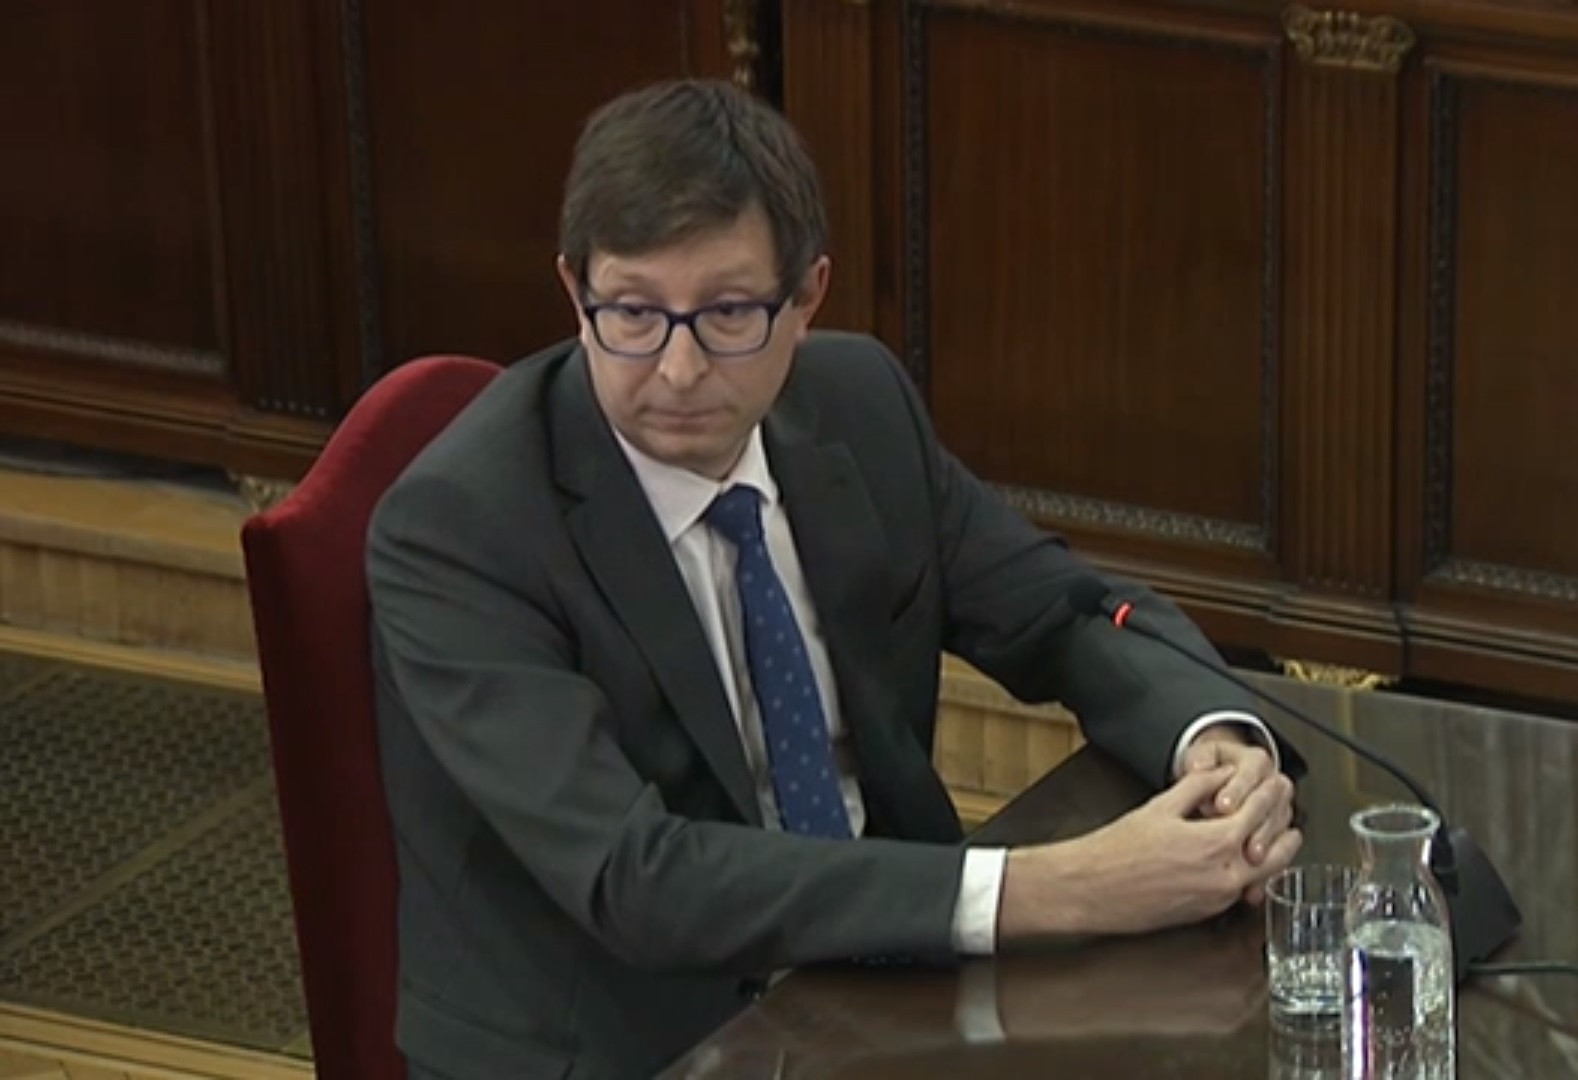 Carles Mundó testifies in the Catalan trial in the Spanish Supreme Court on February 20 2019